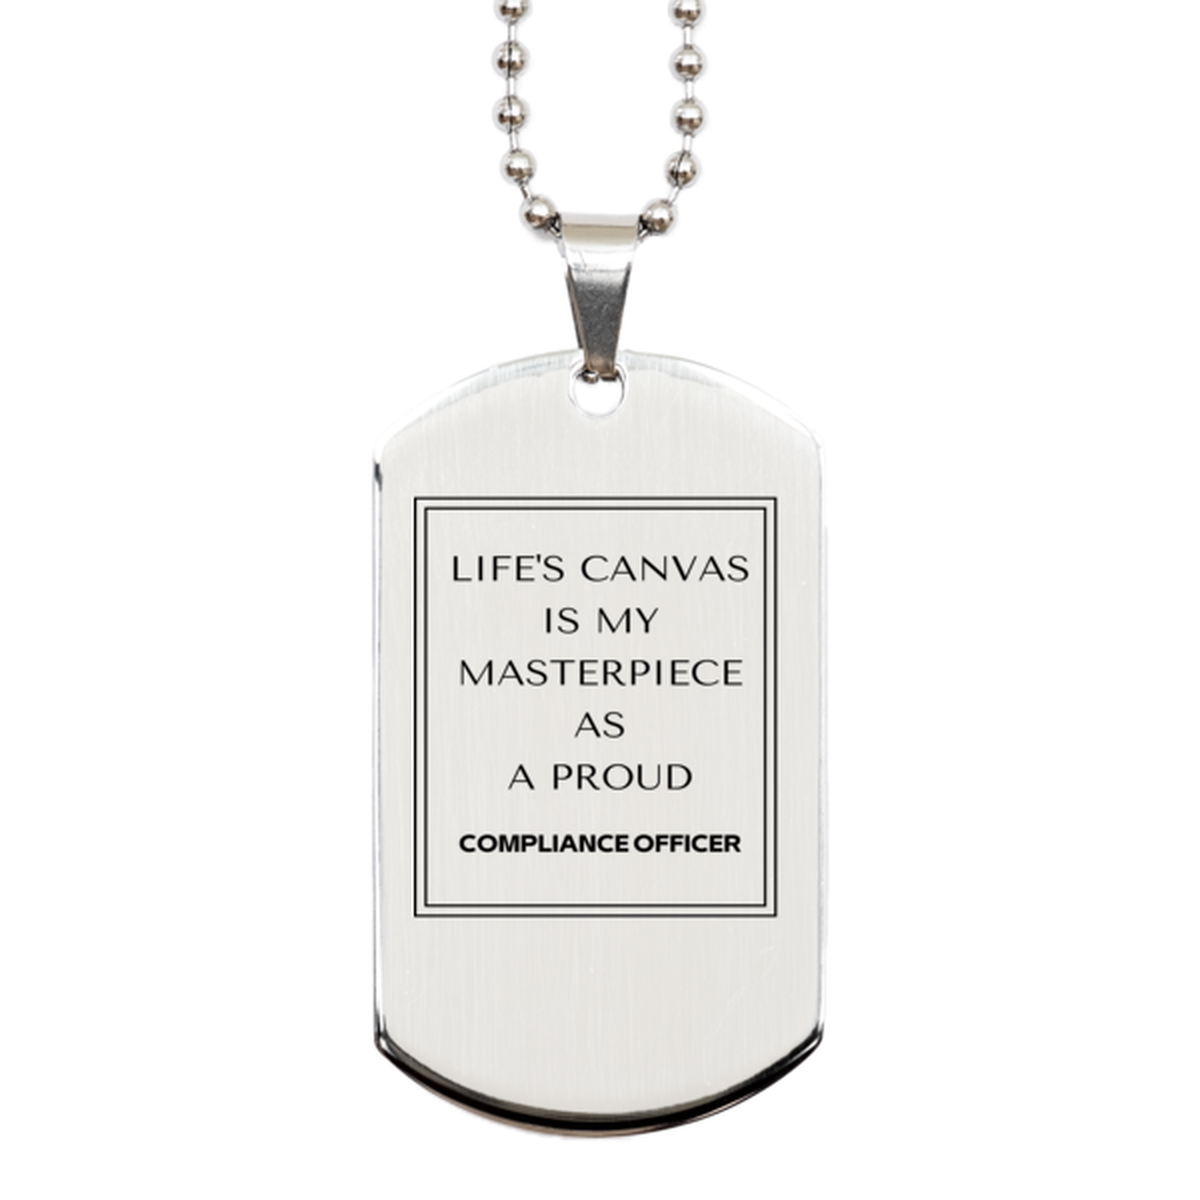 Proud Compliance Officer Gifts, Life's canvas is my masterpiece, Epic Birthday Christmas Unique Silver Dog Tag For Compliance Officer, Coworkers, Men, Women, Friends